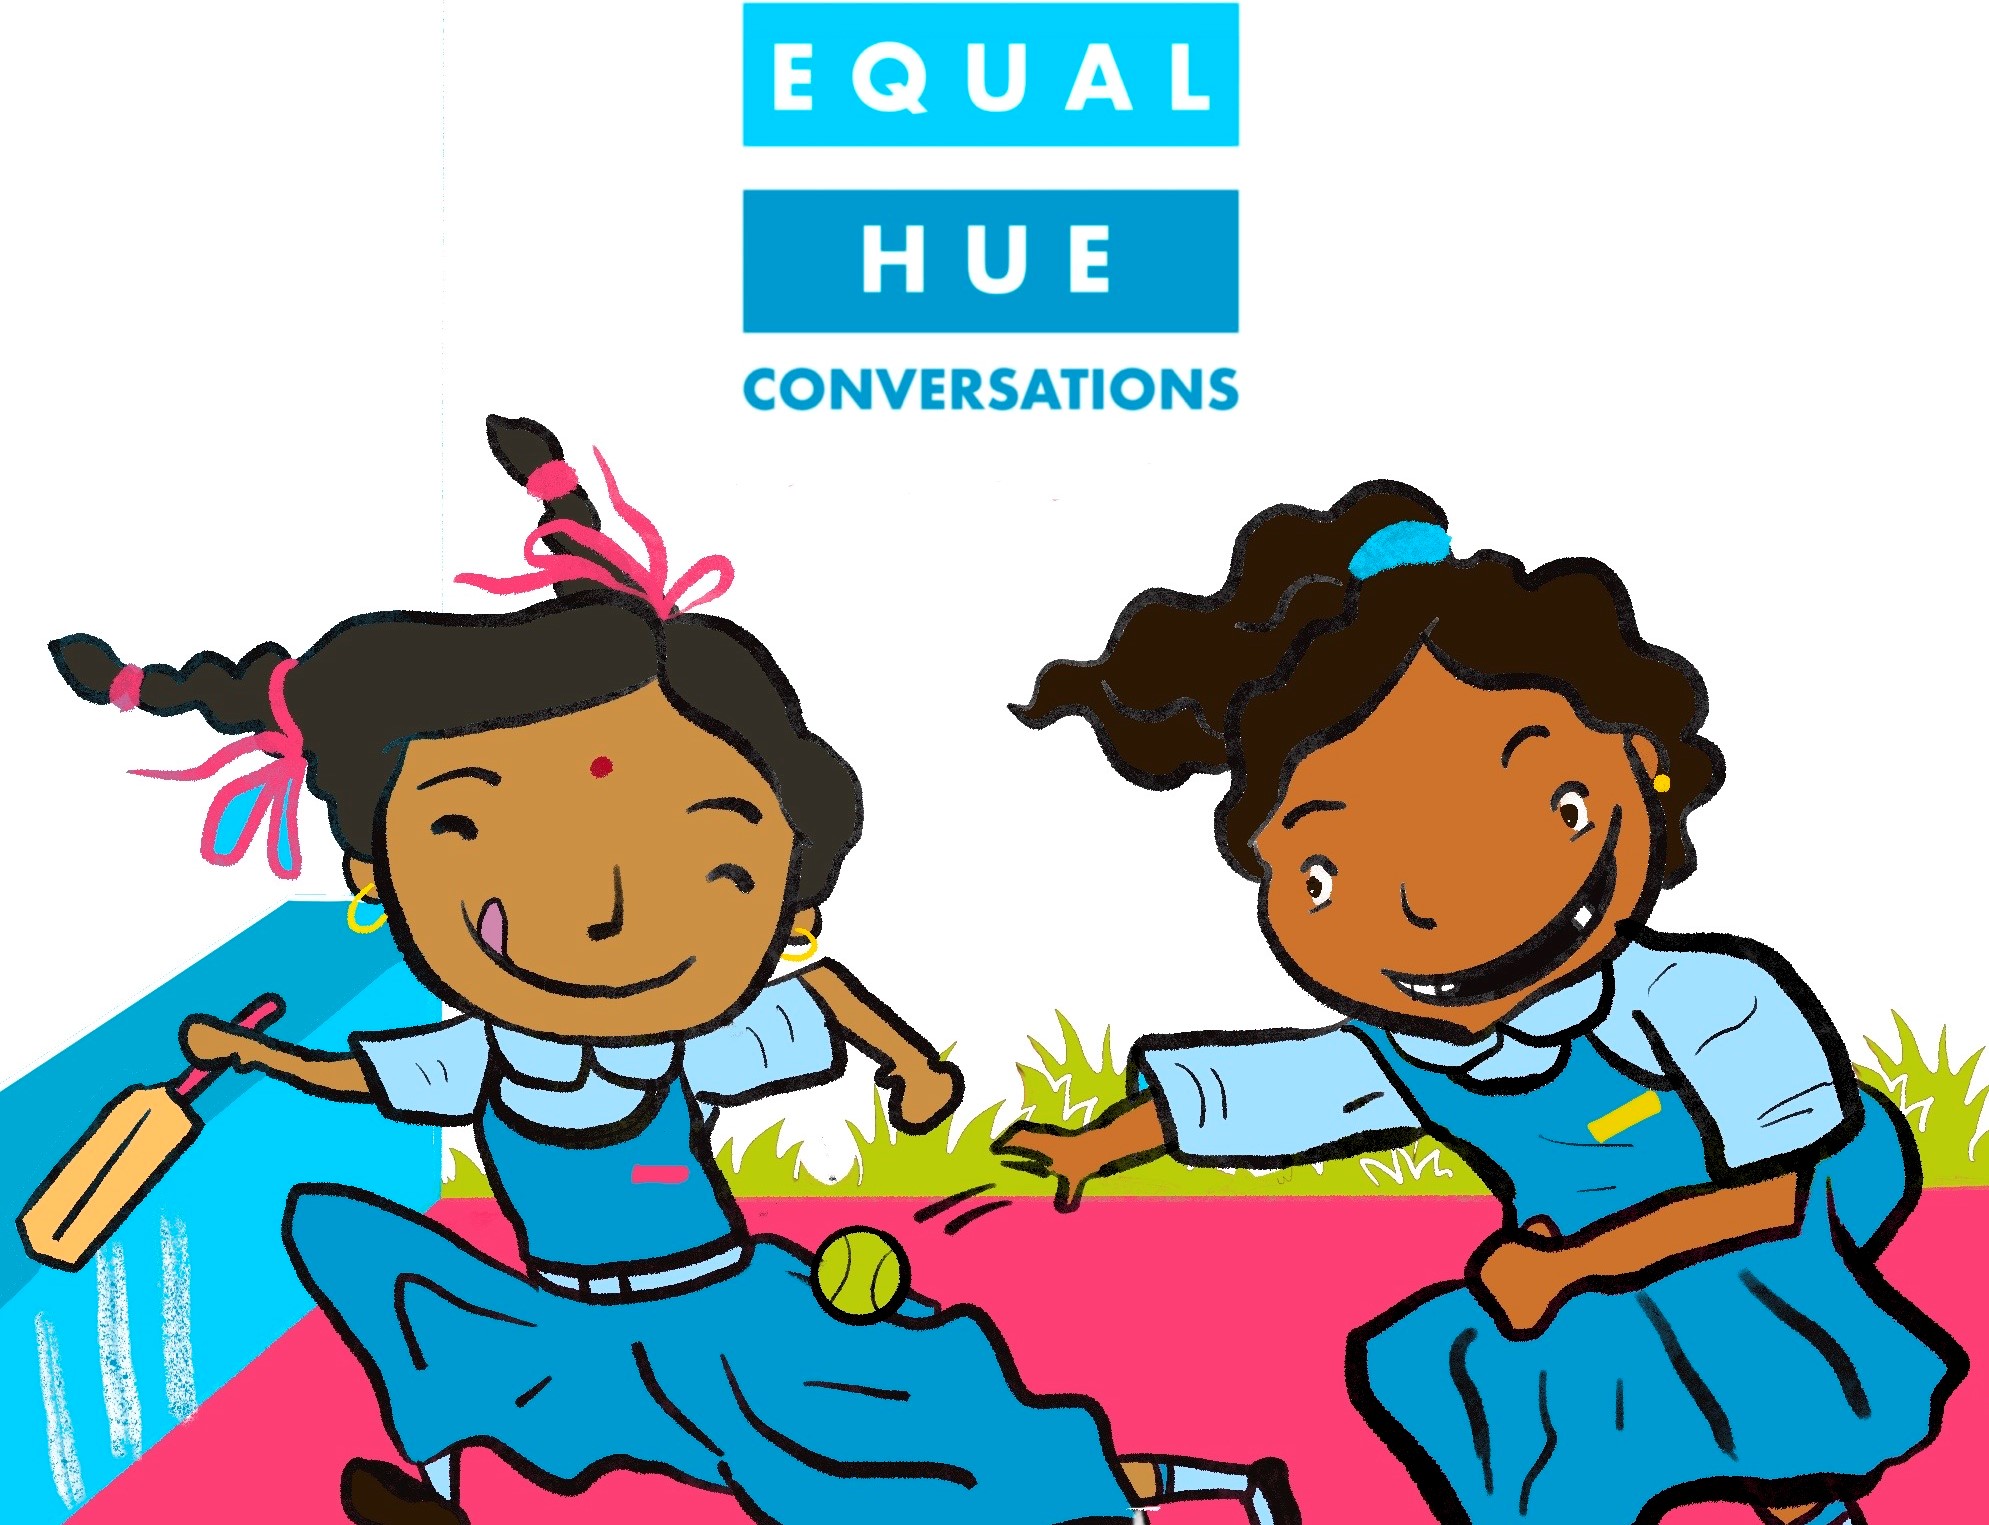 Equal Hue Coversations grassroots cricket for girls